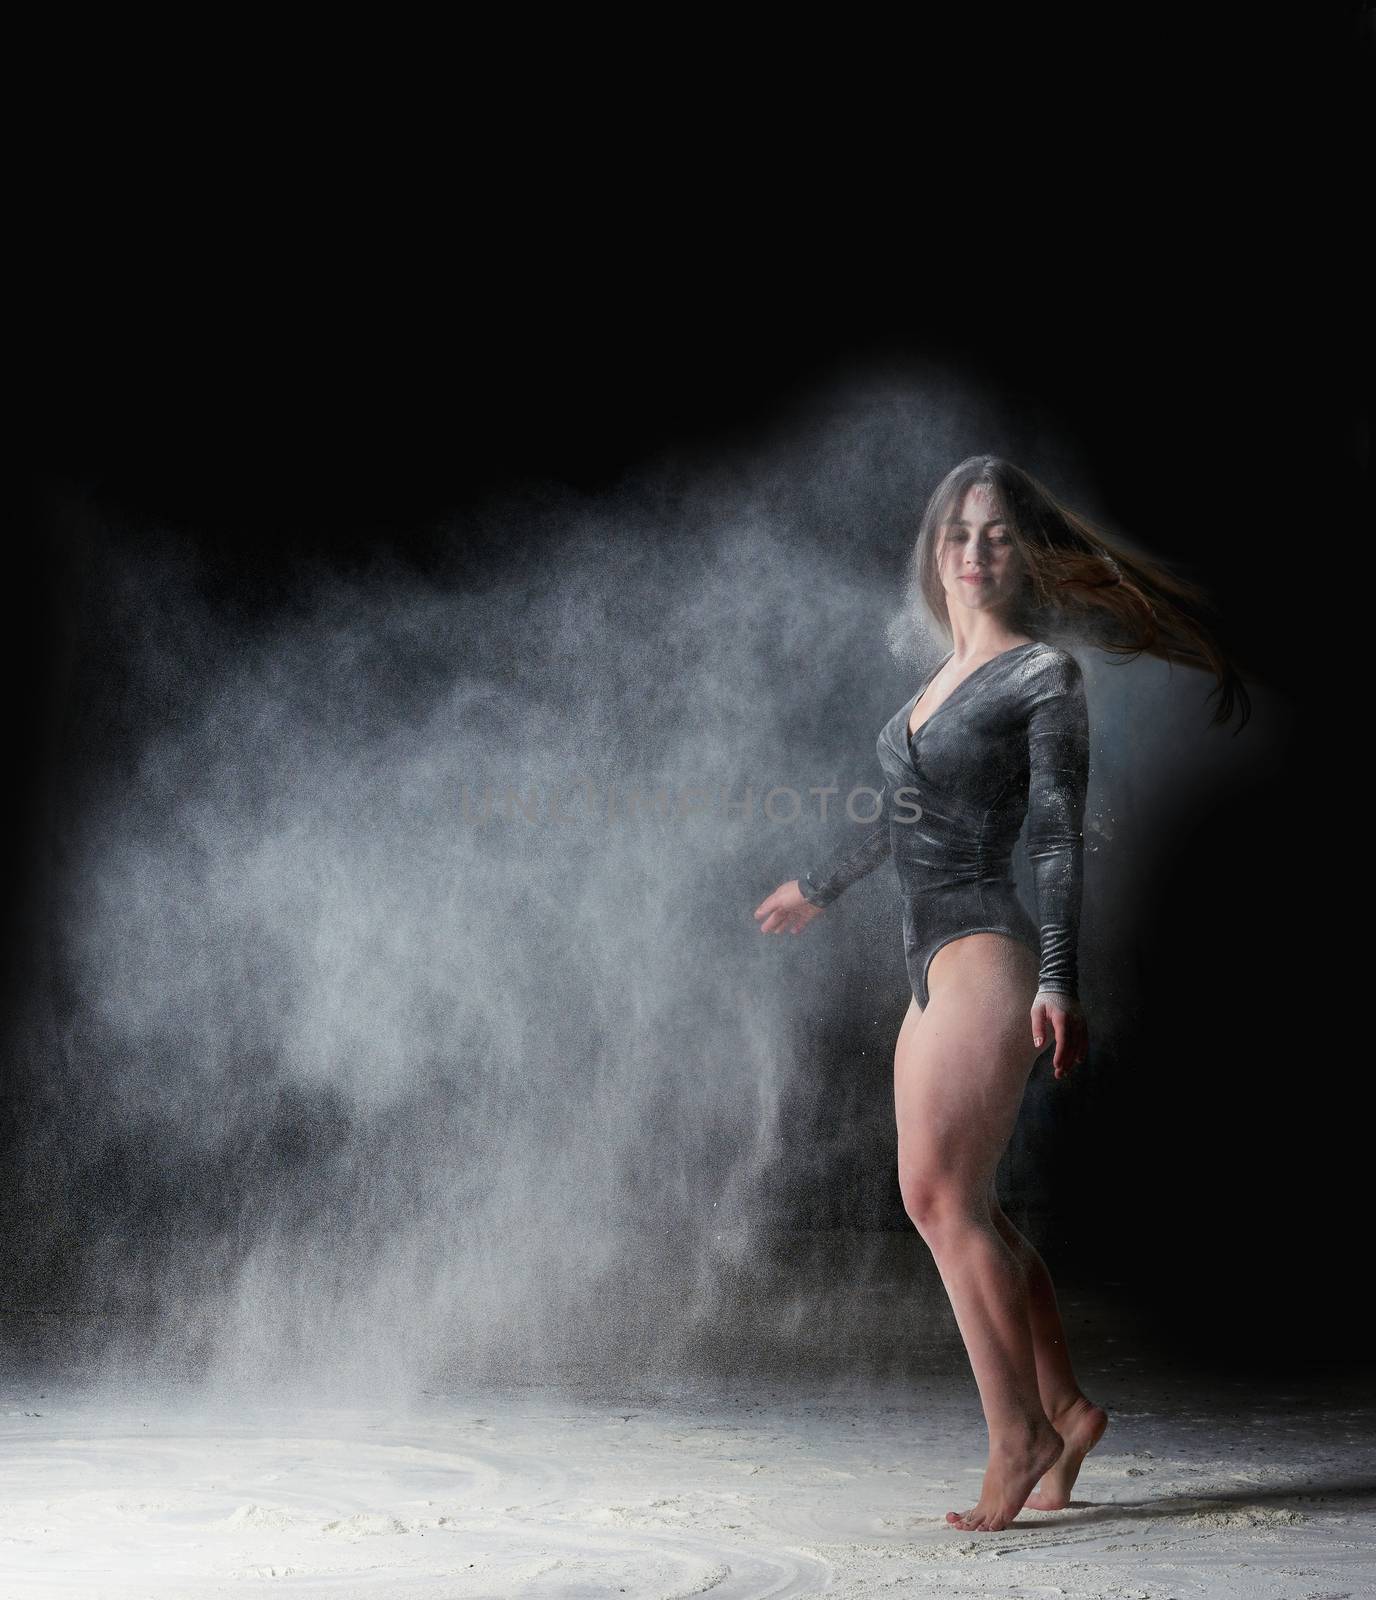 beautiful young caucasian woman in a black bodysuit with a sports figure is dancing in a white cloud of flour on a black background